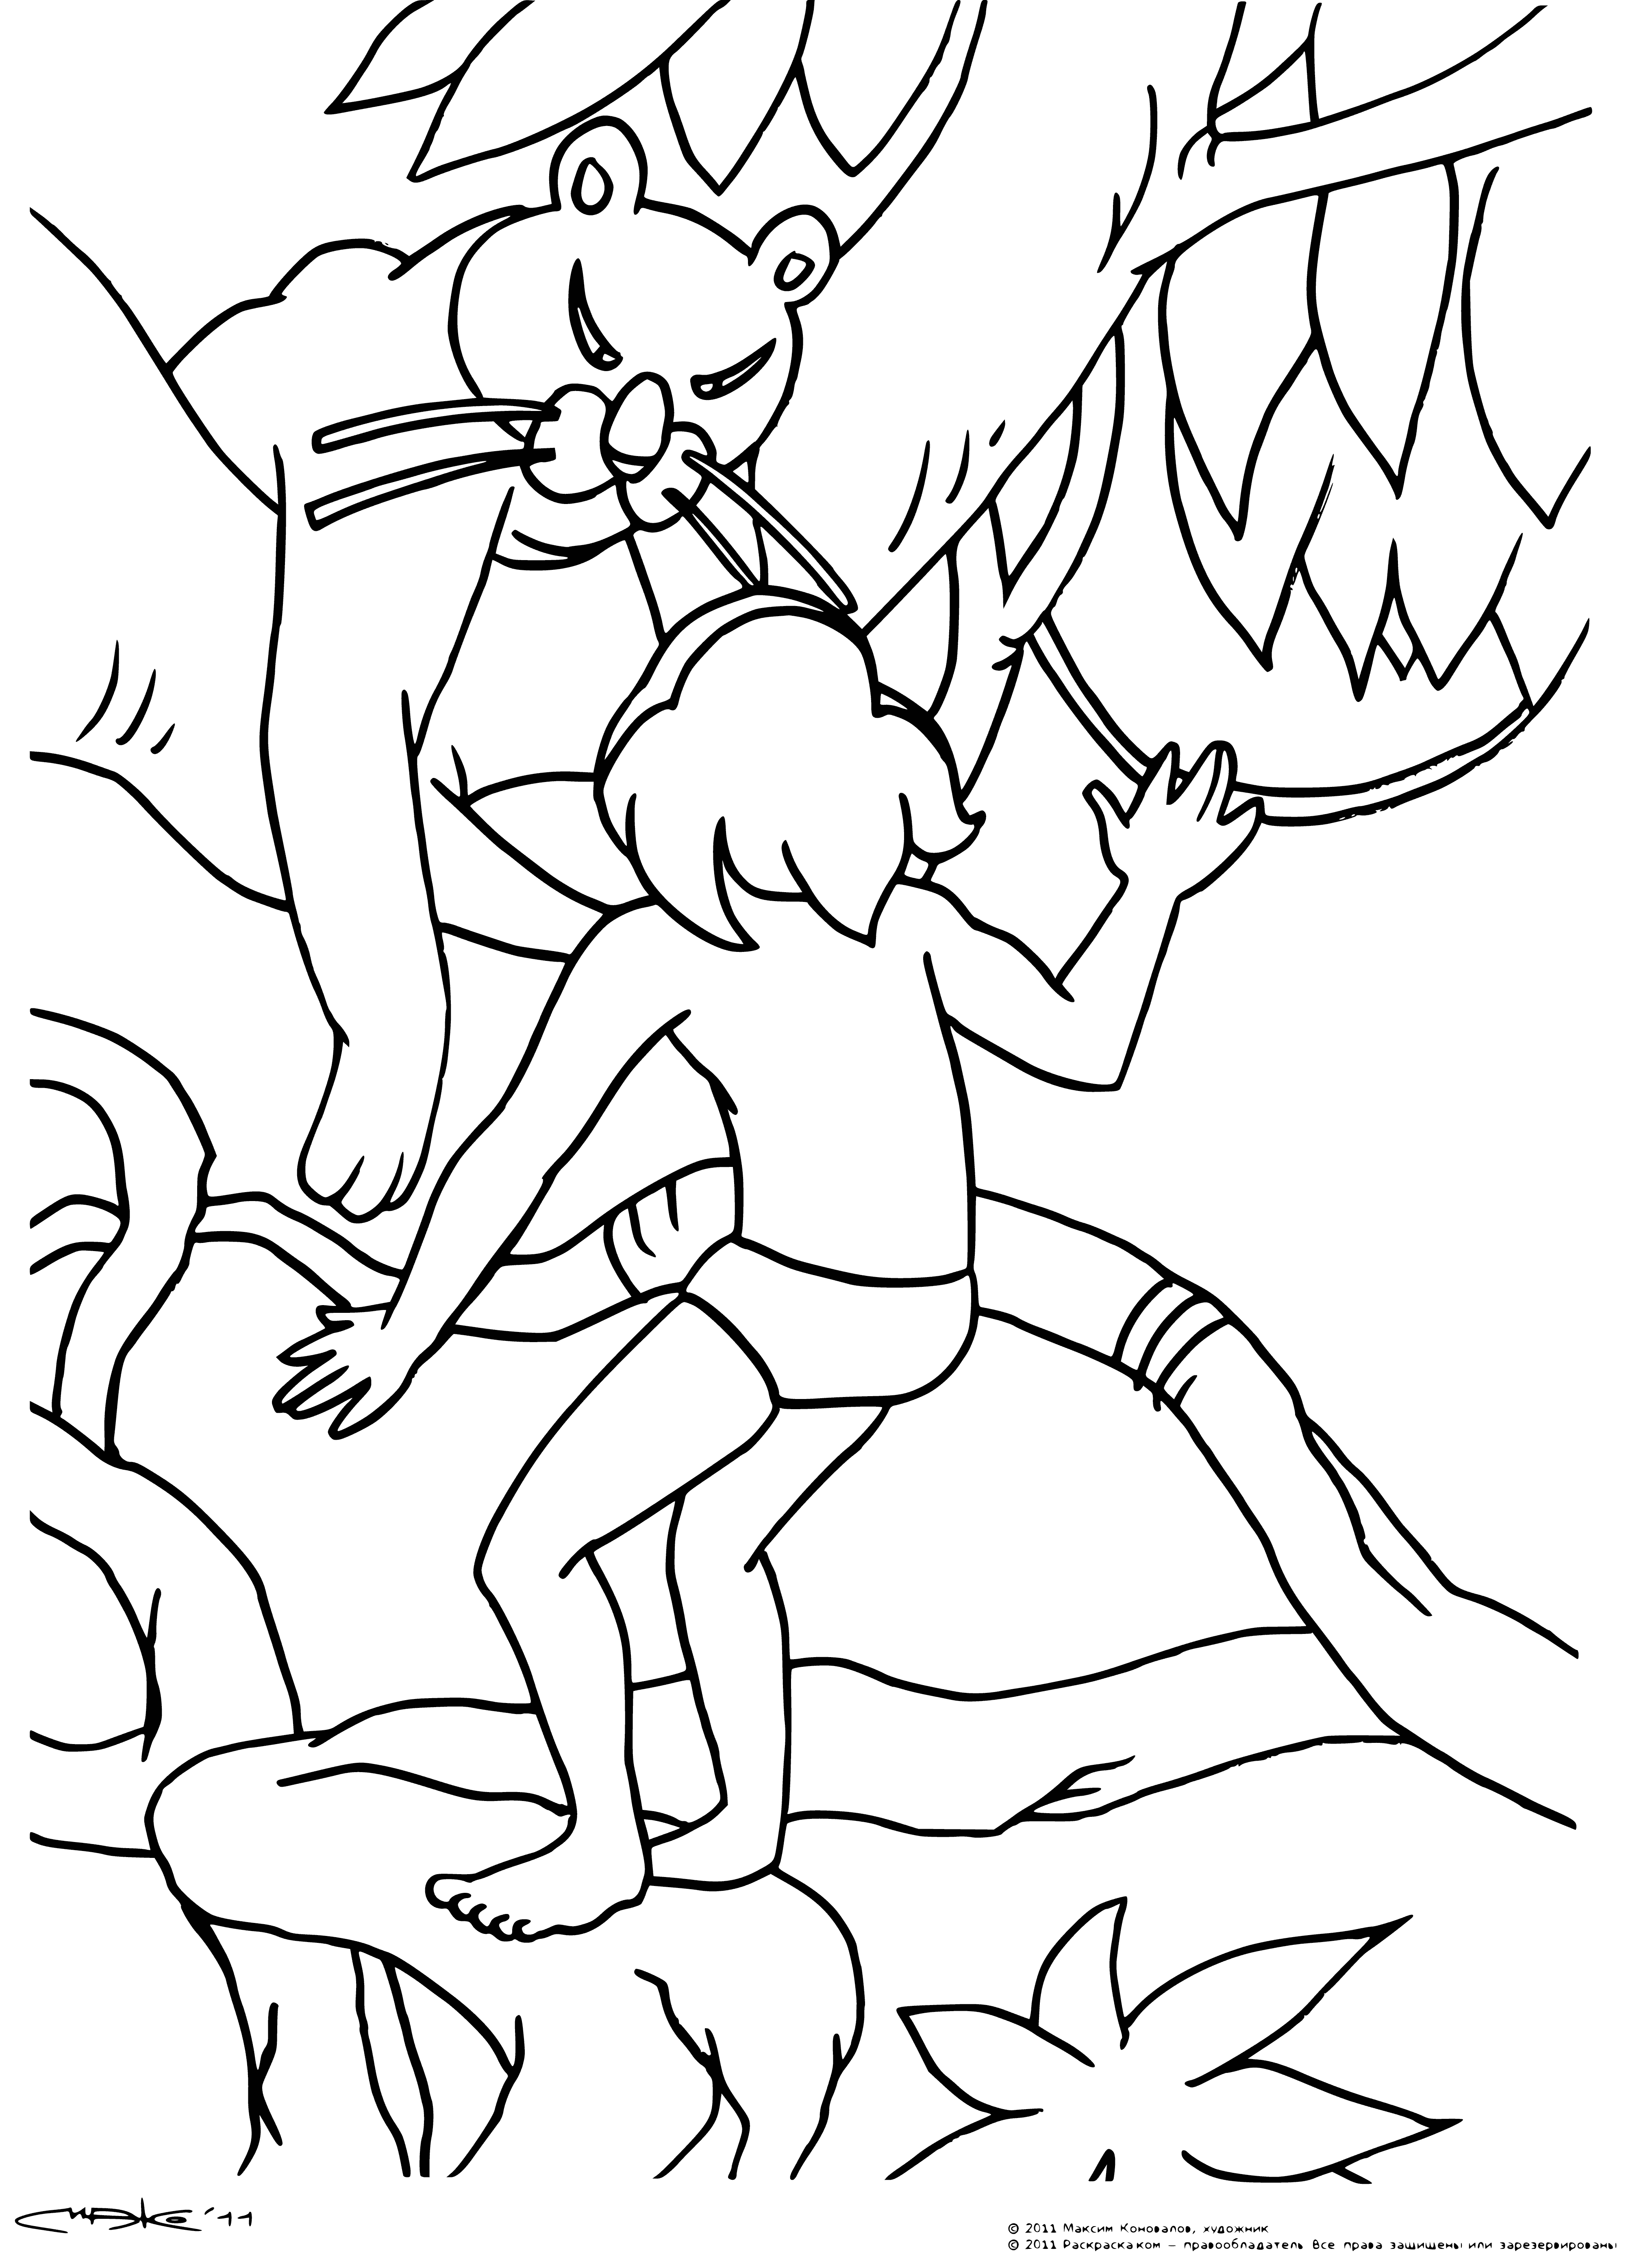 coloring page: Boy climbs a tree using hands and feet. Eyes on branch above, focused on the climb.